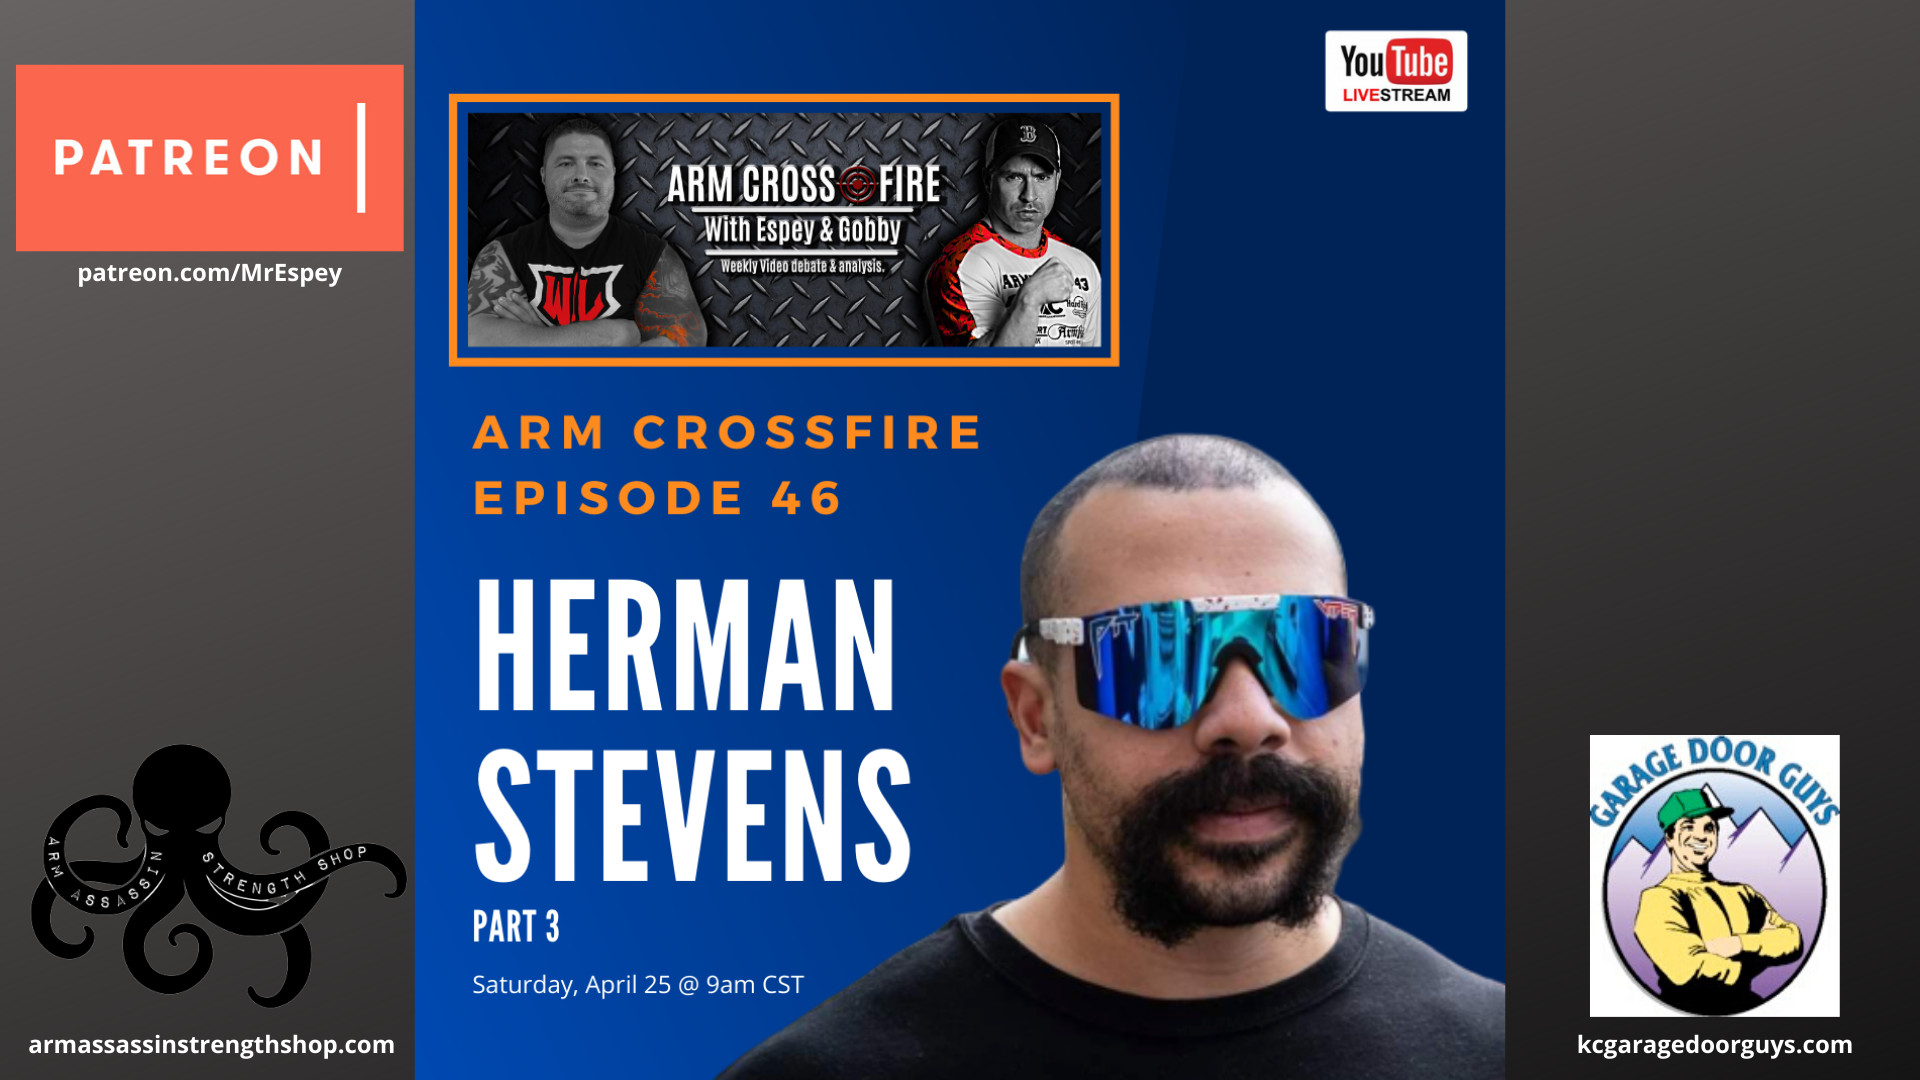 Arm Crossfire 46 - YouTube LIVE with Herman Stevens – Part 3